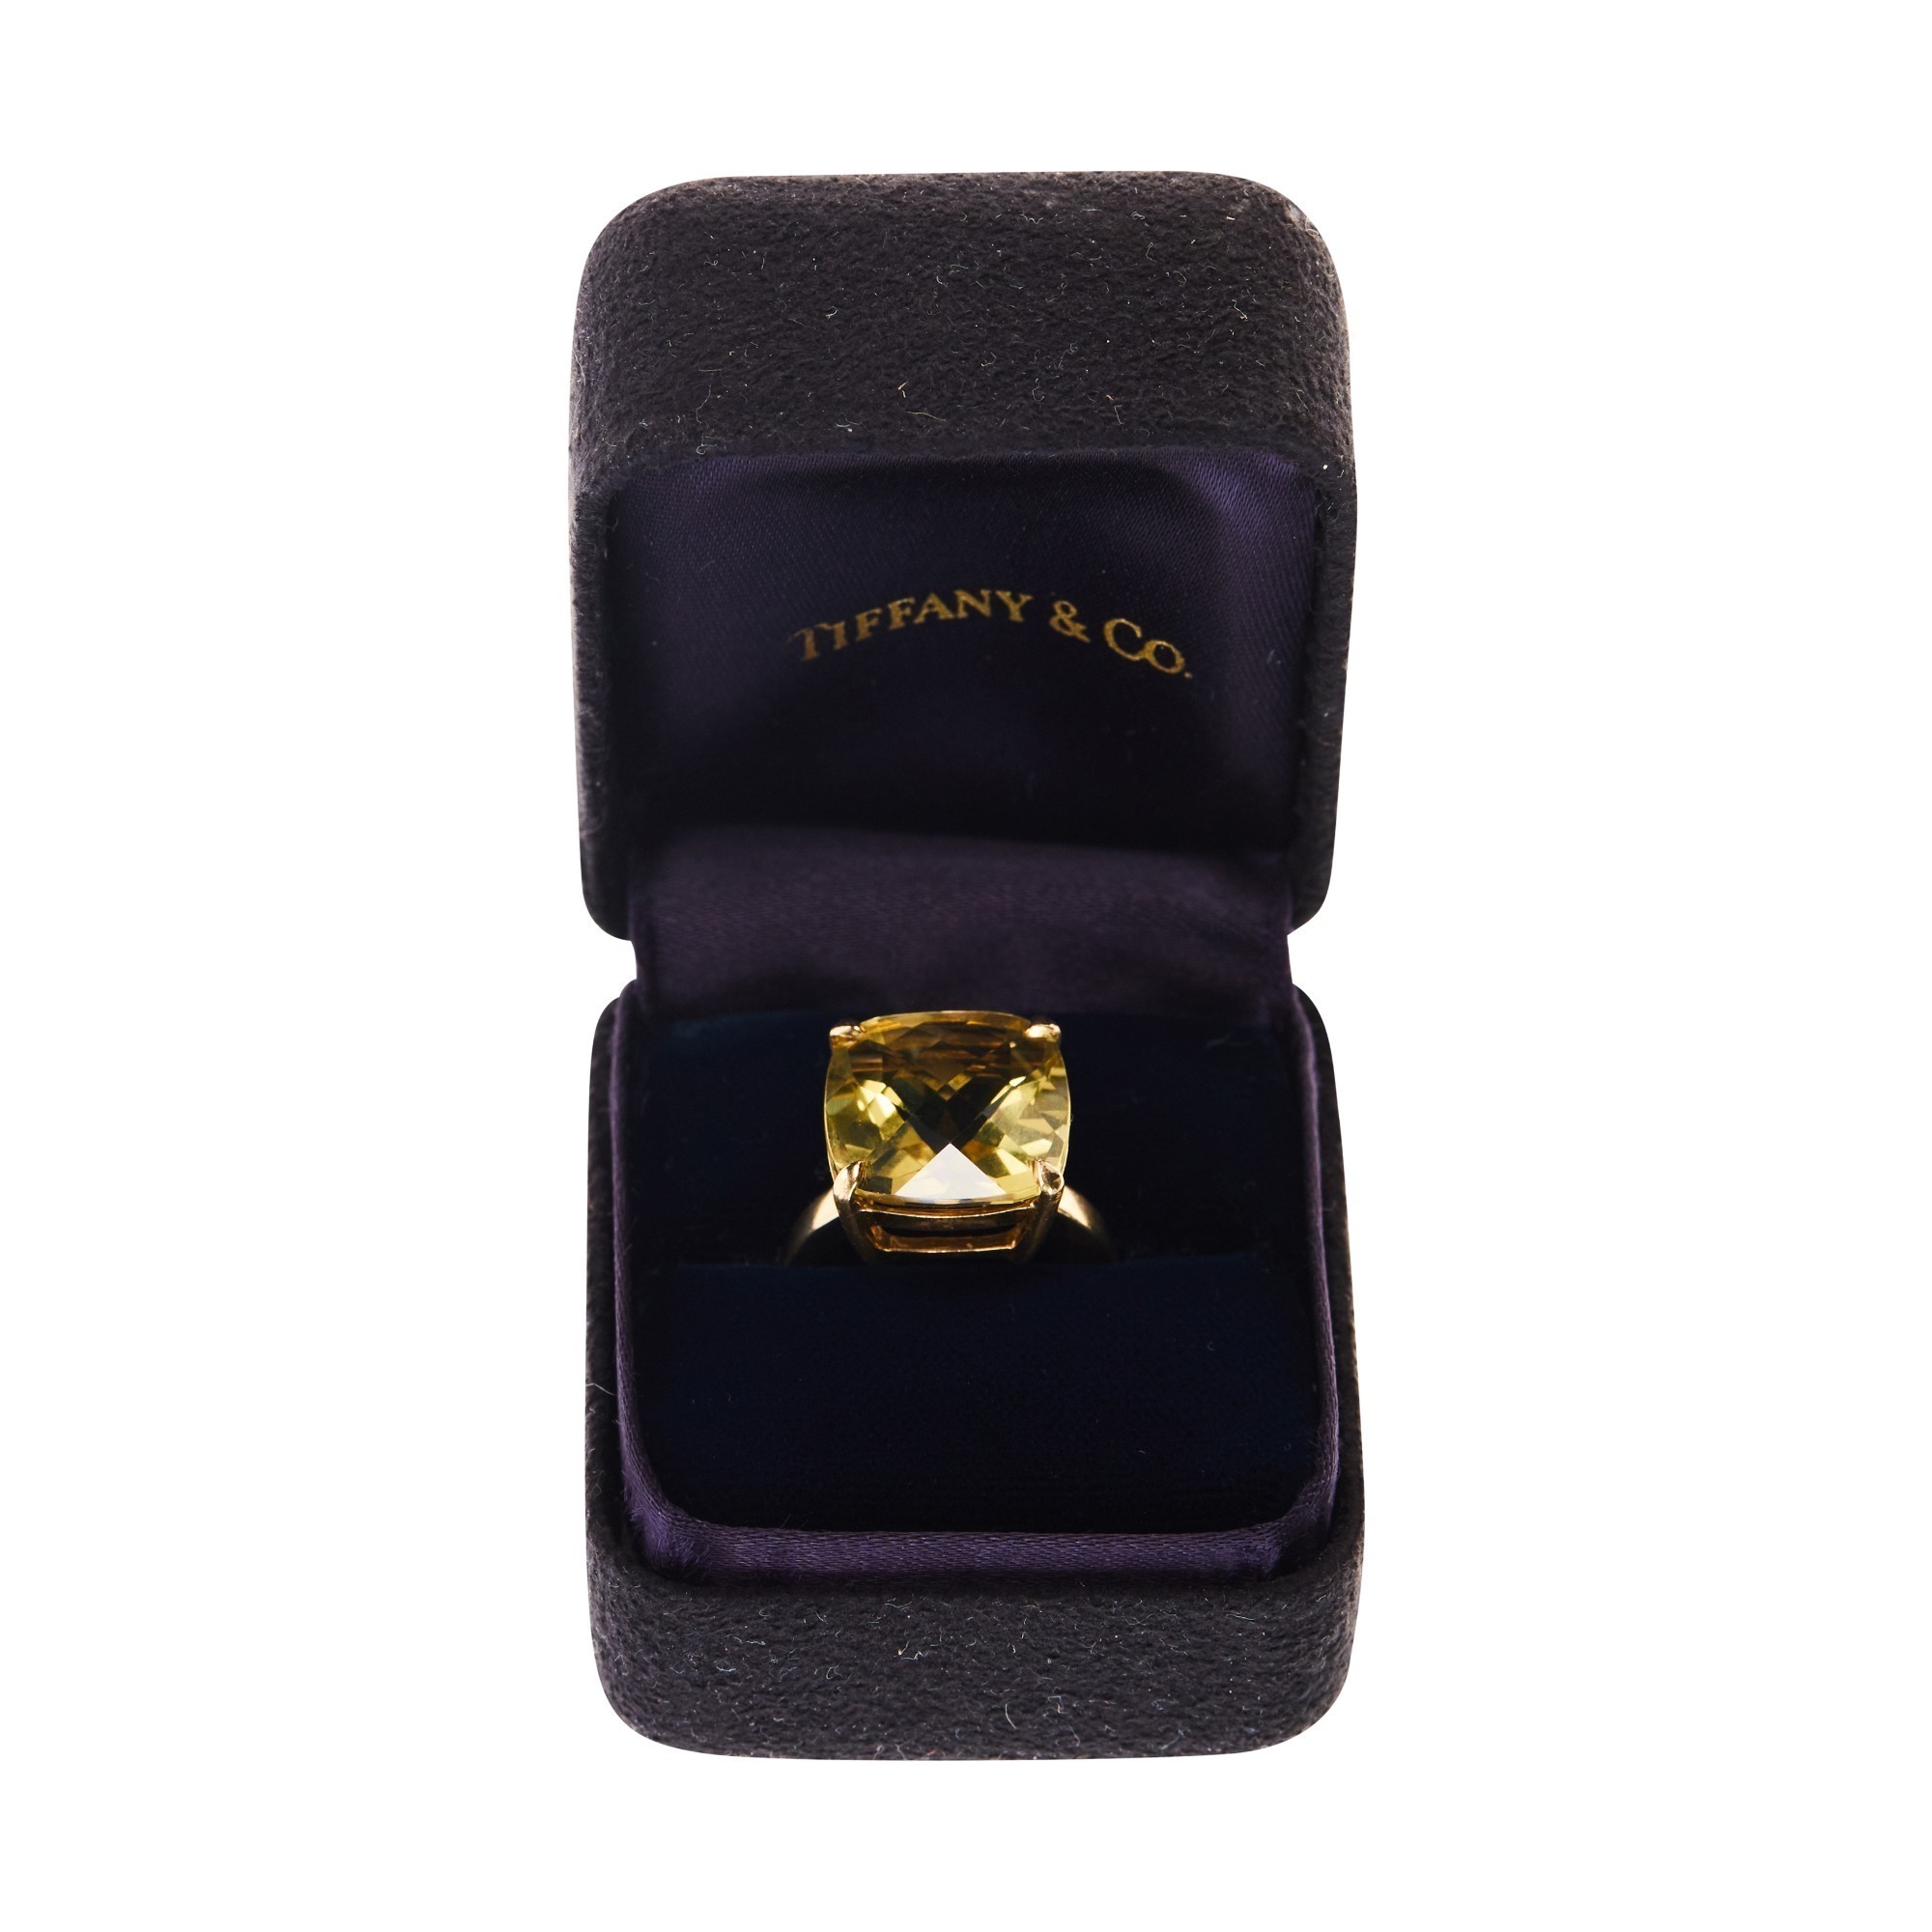 Tiffany & Co. 18K Yellow Gold and Faceted Citrine Ring